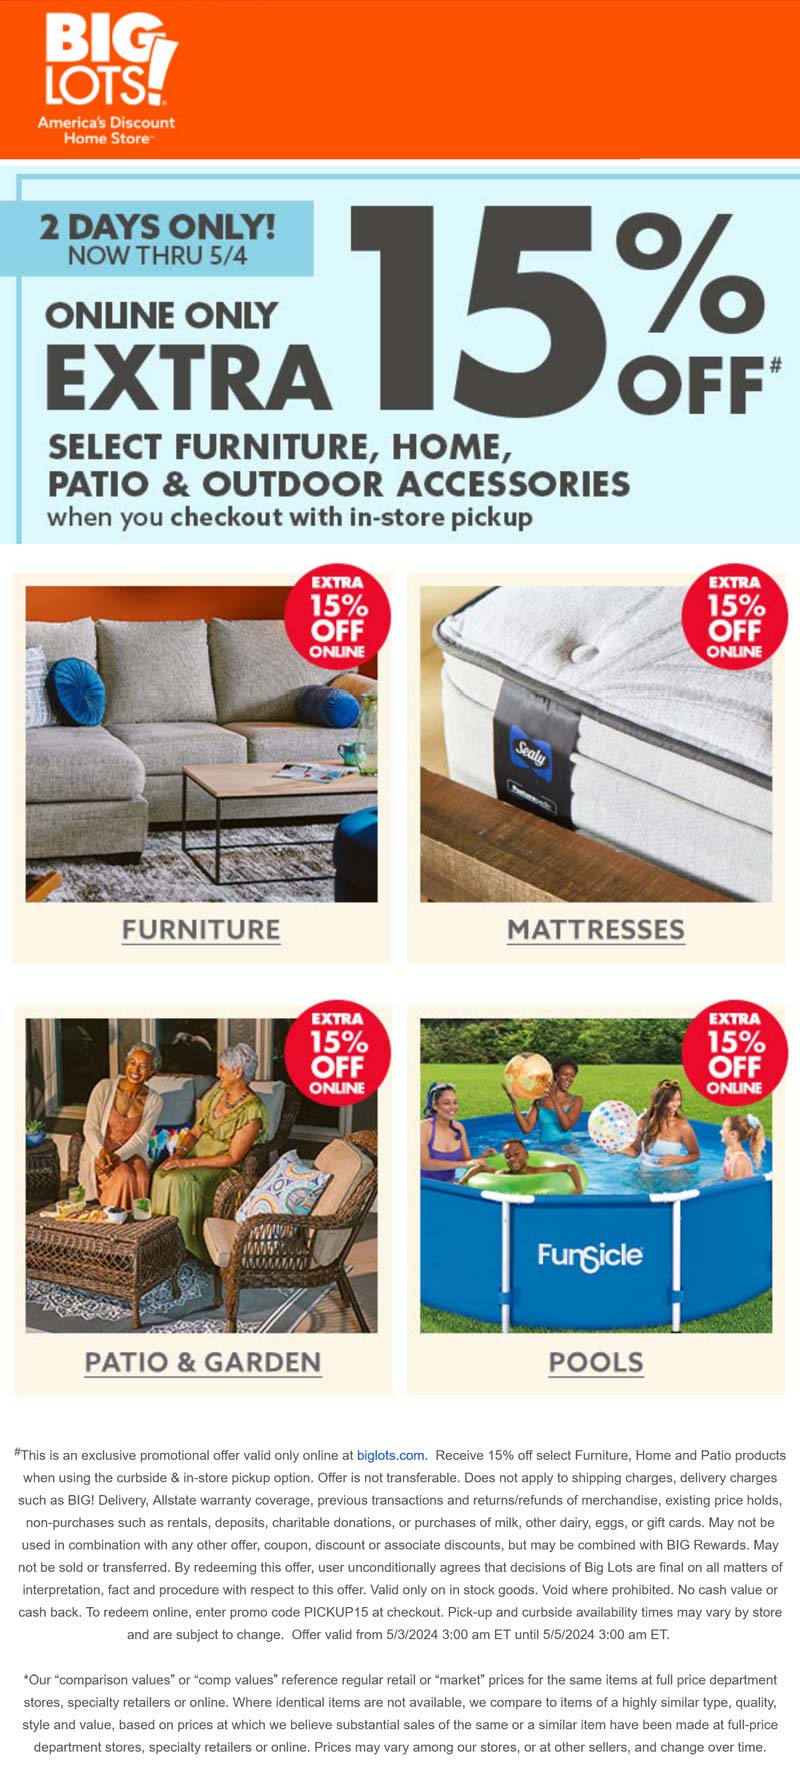 Big Lots stores Coupon  Extra 15% off via in-store pickup at Big Lots via promo code PICKUP15 #biglots 